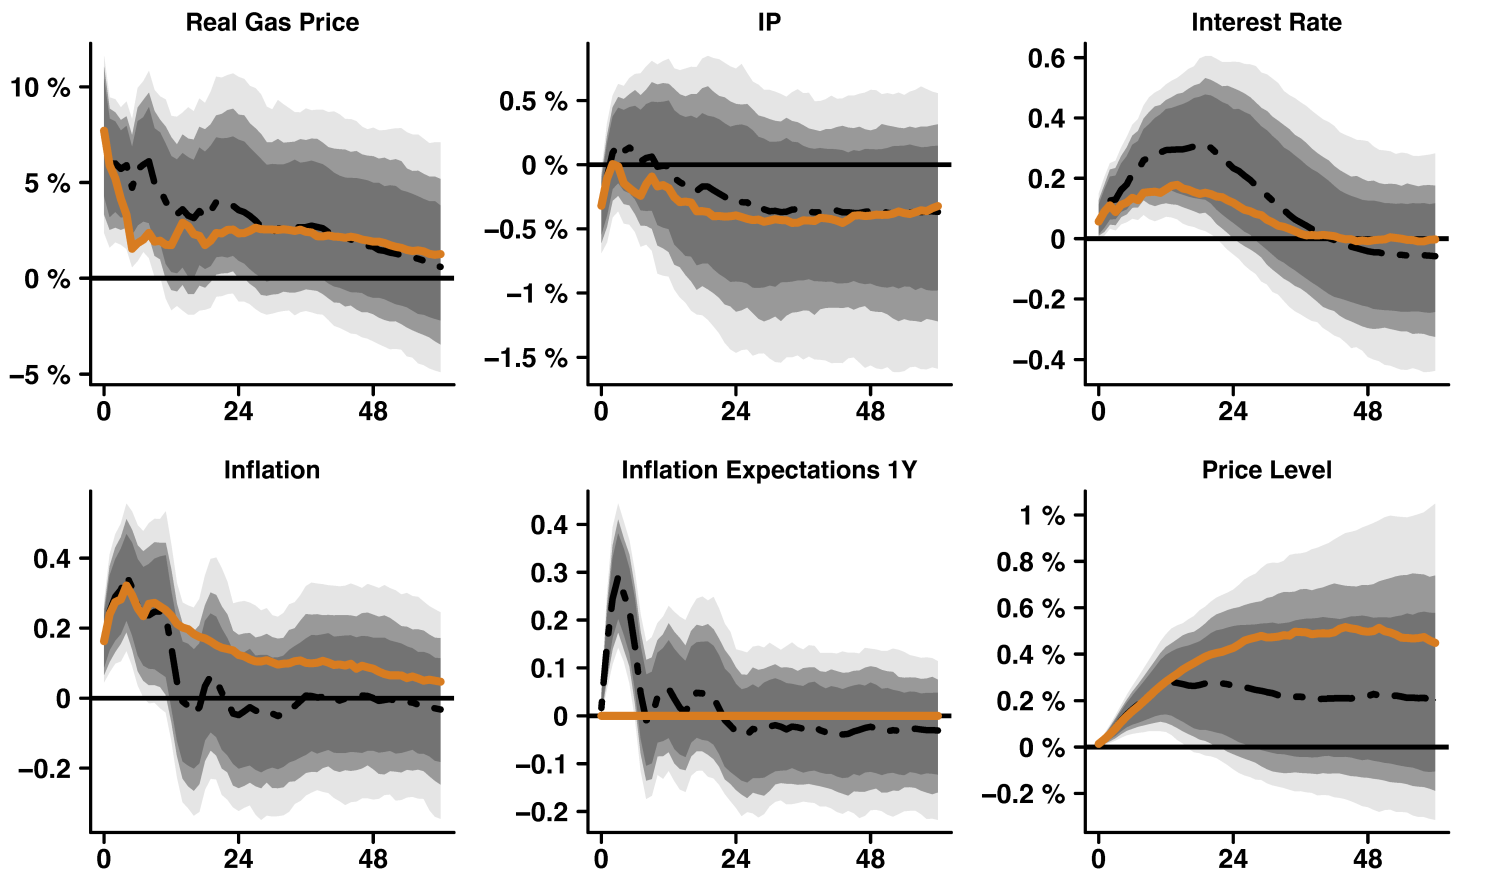 Figure 3 Impulse response functions and the counterfactuals to a real gas price shock in the US